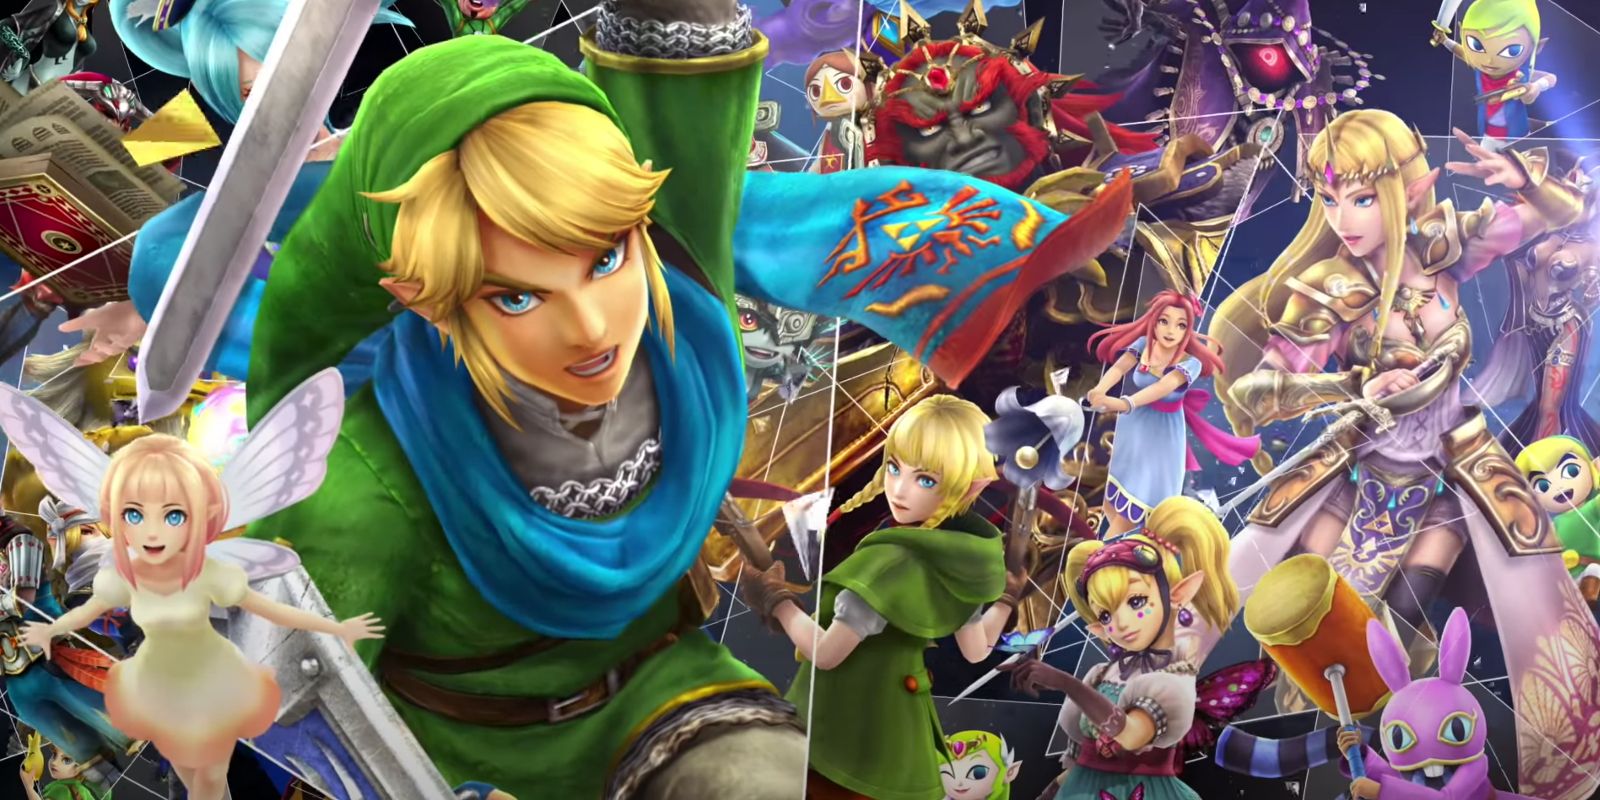 Hyrule Warriors is Zelda's crossover with Dynasty Warriors.